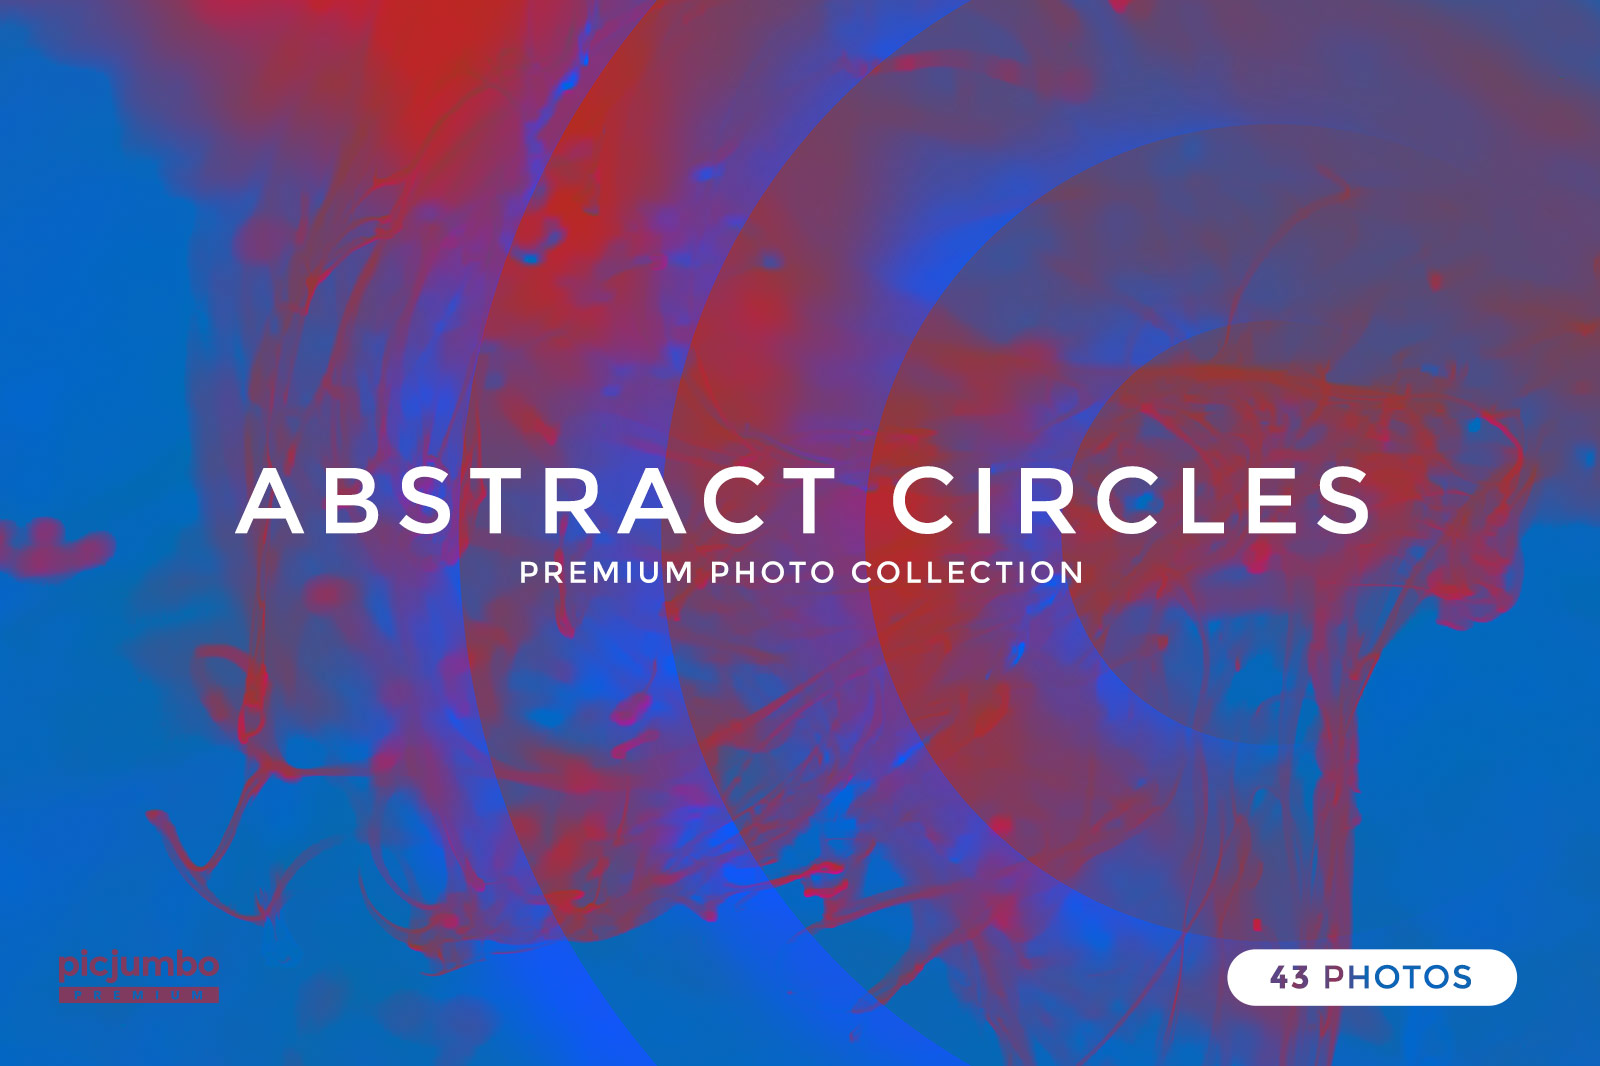 Download hi-res stock photos from our Abstract Circles PREMIUM Collection!